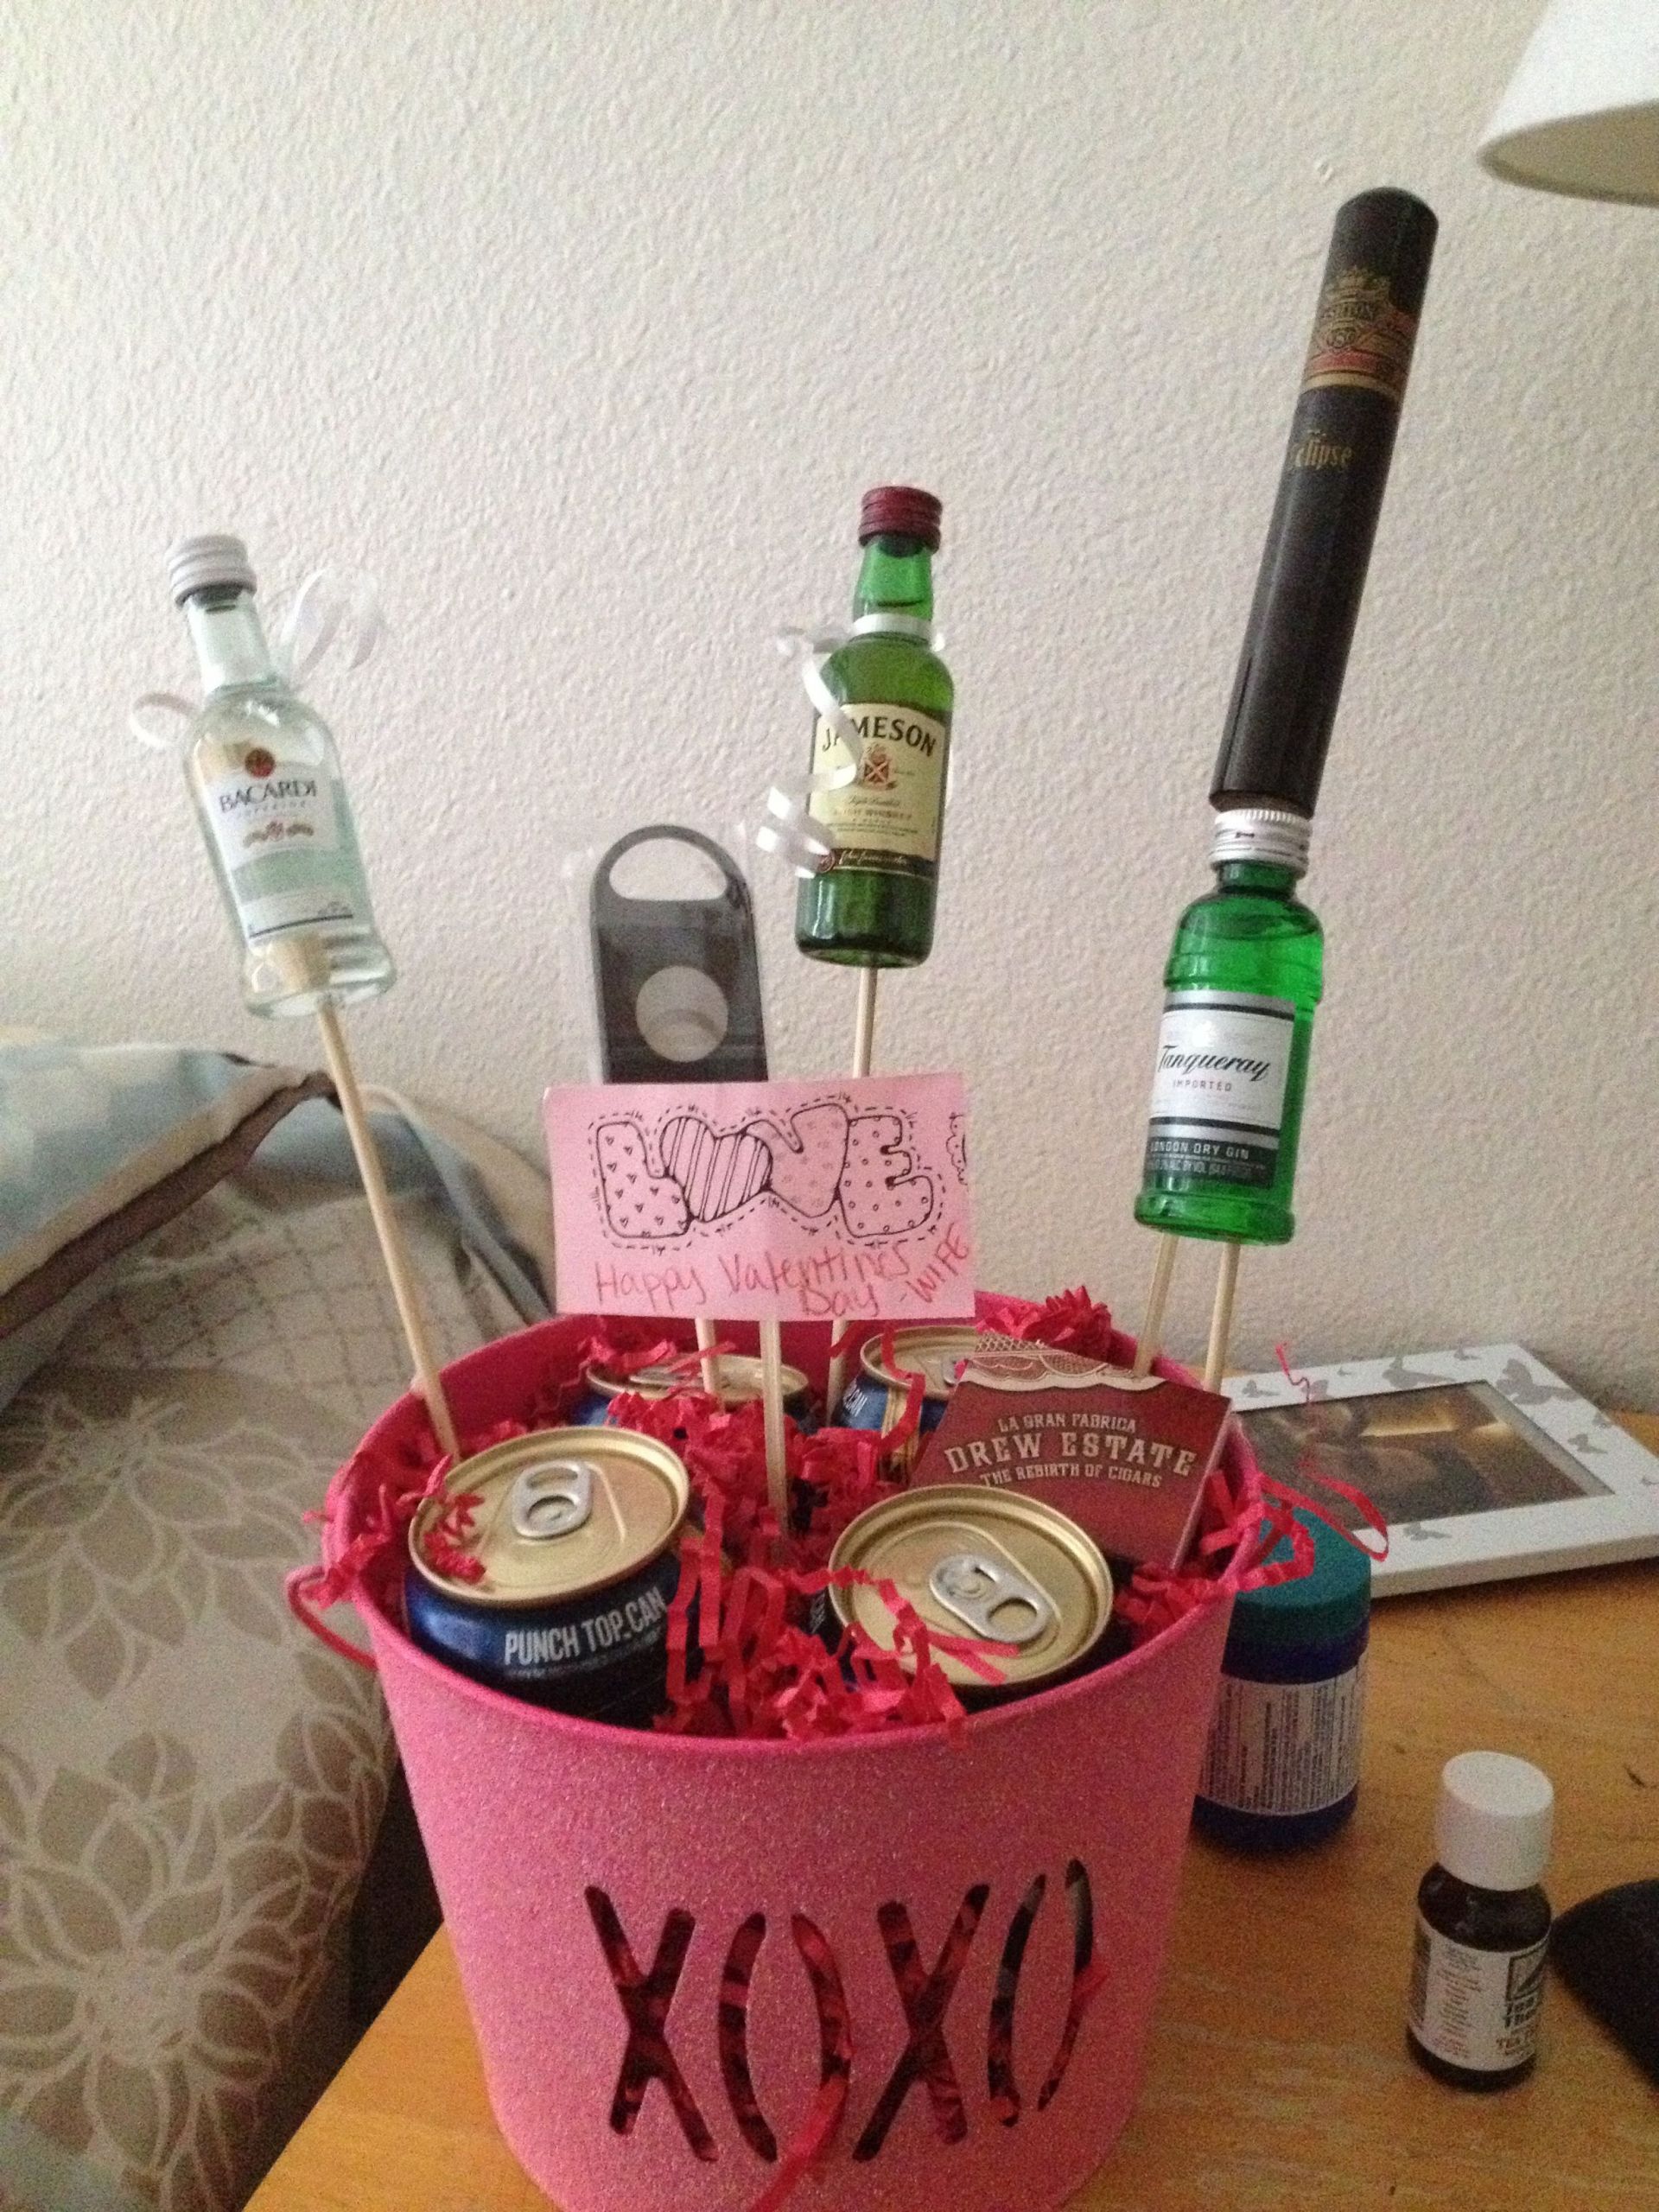 Valentine Gift Ideas For Husband Homemade
 I would do this in Christmas a theme t for husband